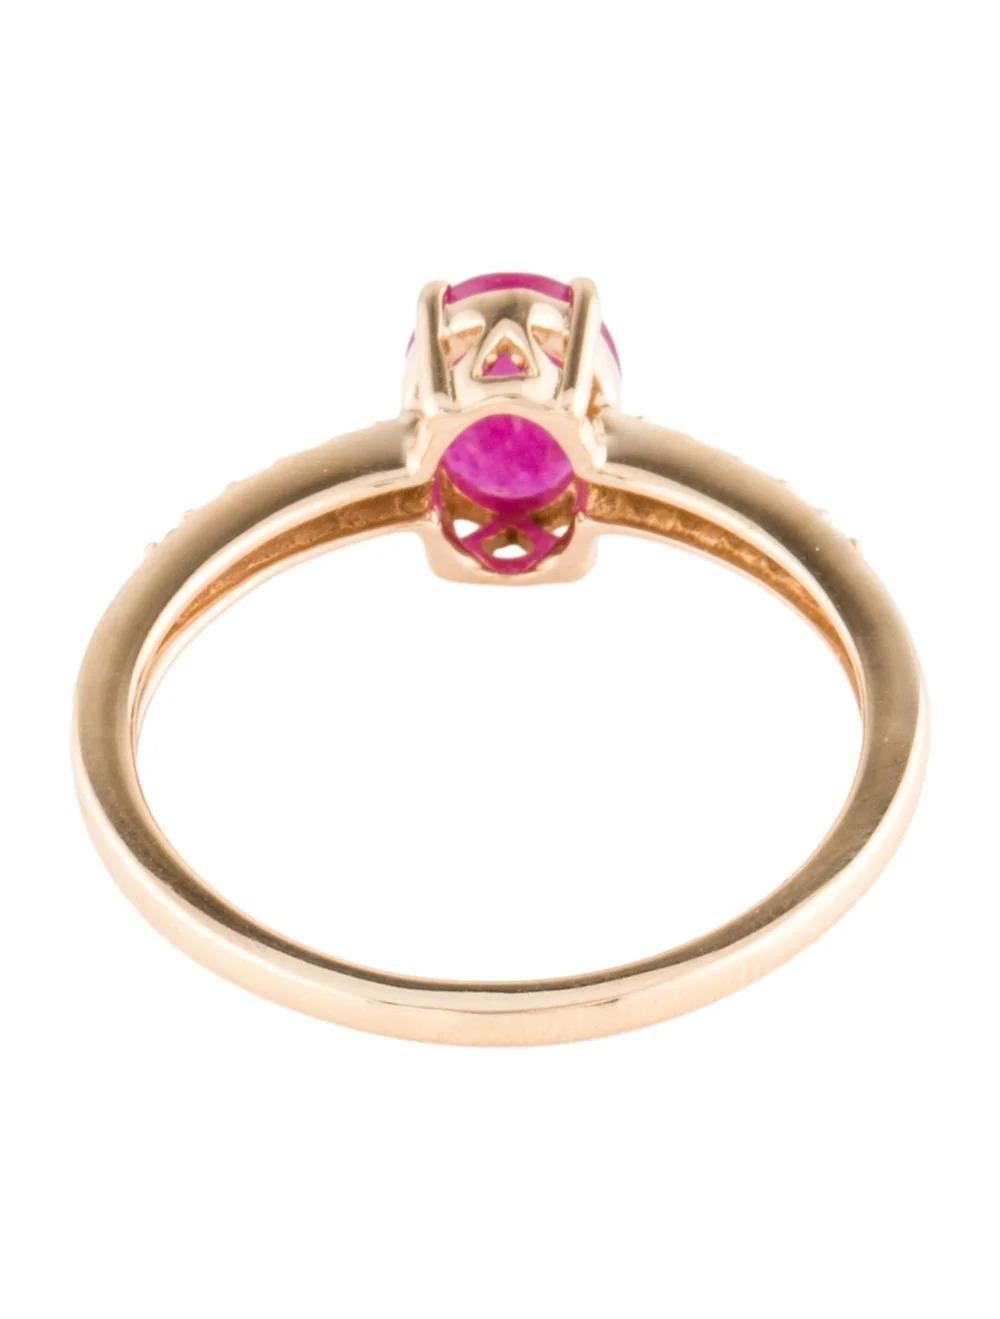 14K Ruby & Diamond Cocktail Ring - Size 8.75 - Timeless Elegance, Luxury Jewelry In New Condition For Sale In Holtsville, NY